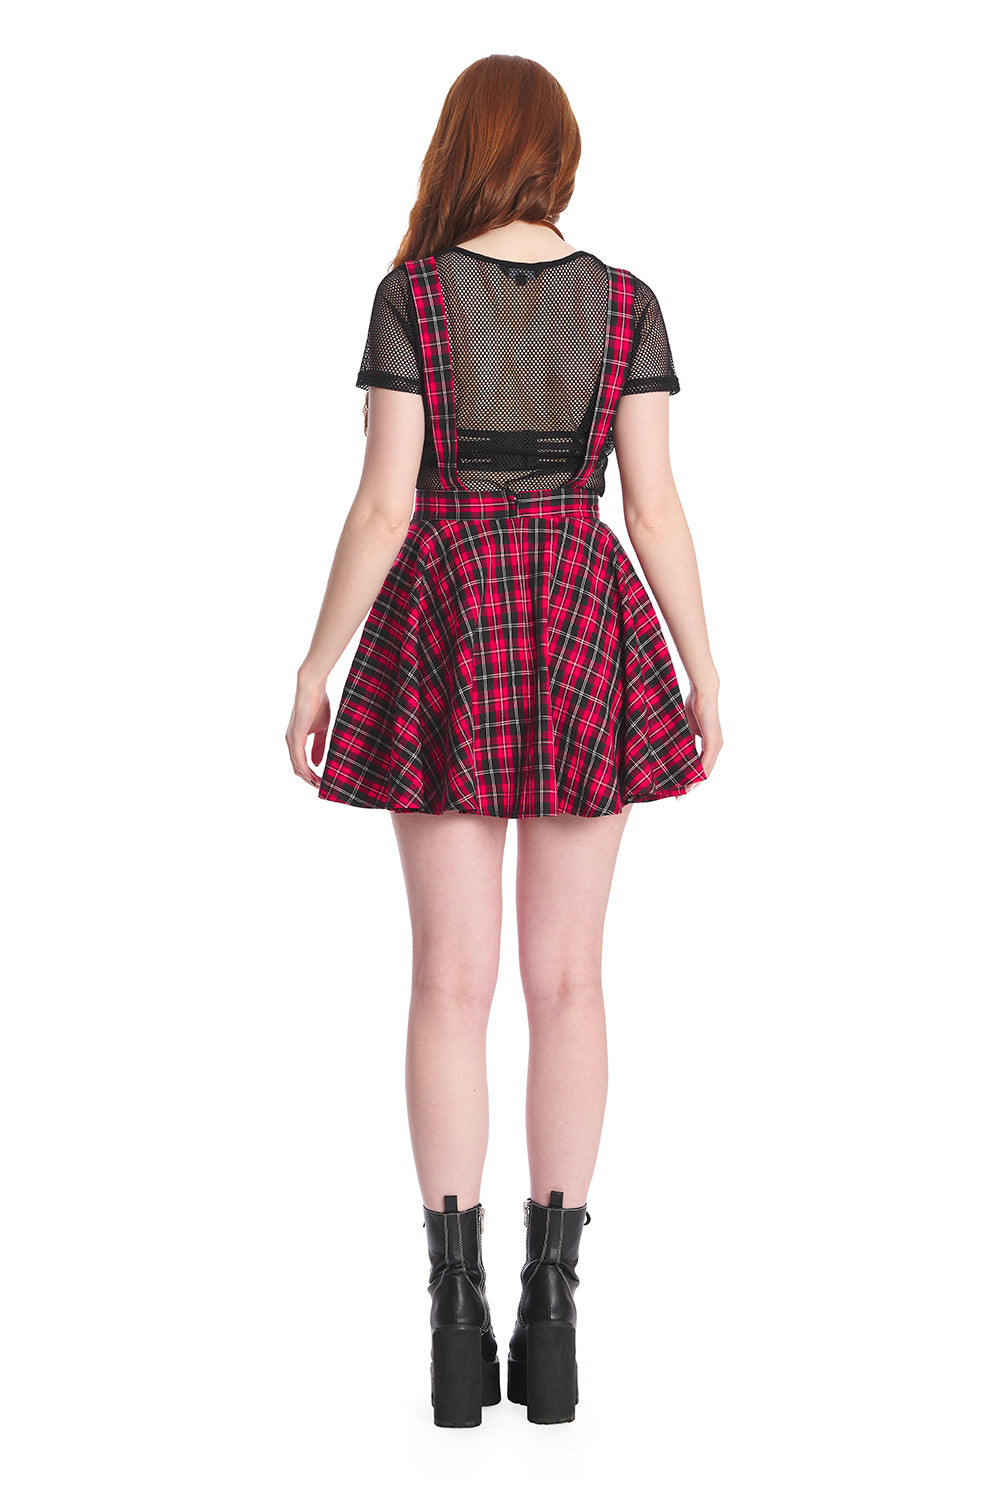 Model in a red pinafore dress with black mesh crop top and black boots 